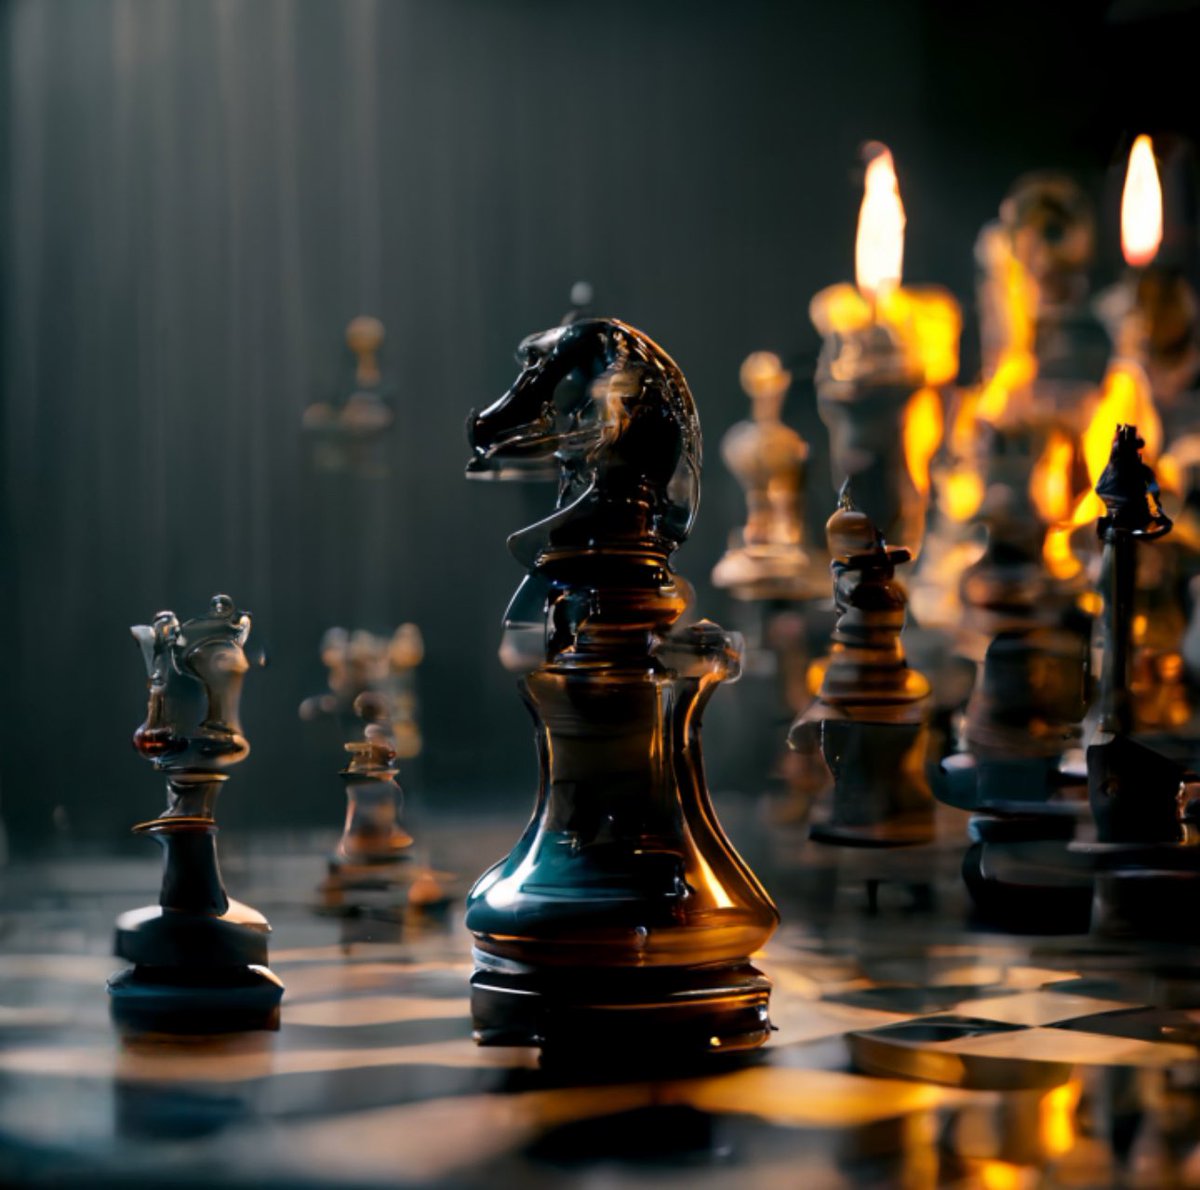 In a game of chess, u don't speak. You just act. The only time that u ever speak when playing chess is to say checkmate. Life is like chess. Don't broadcast ur intentions. Act quietly. Keep achieving. Your achievements are your checkmate. Chet Gutierrez